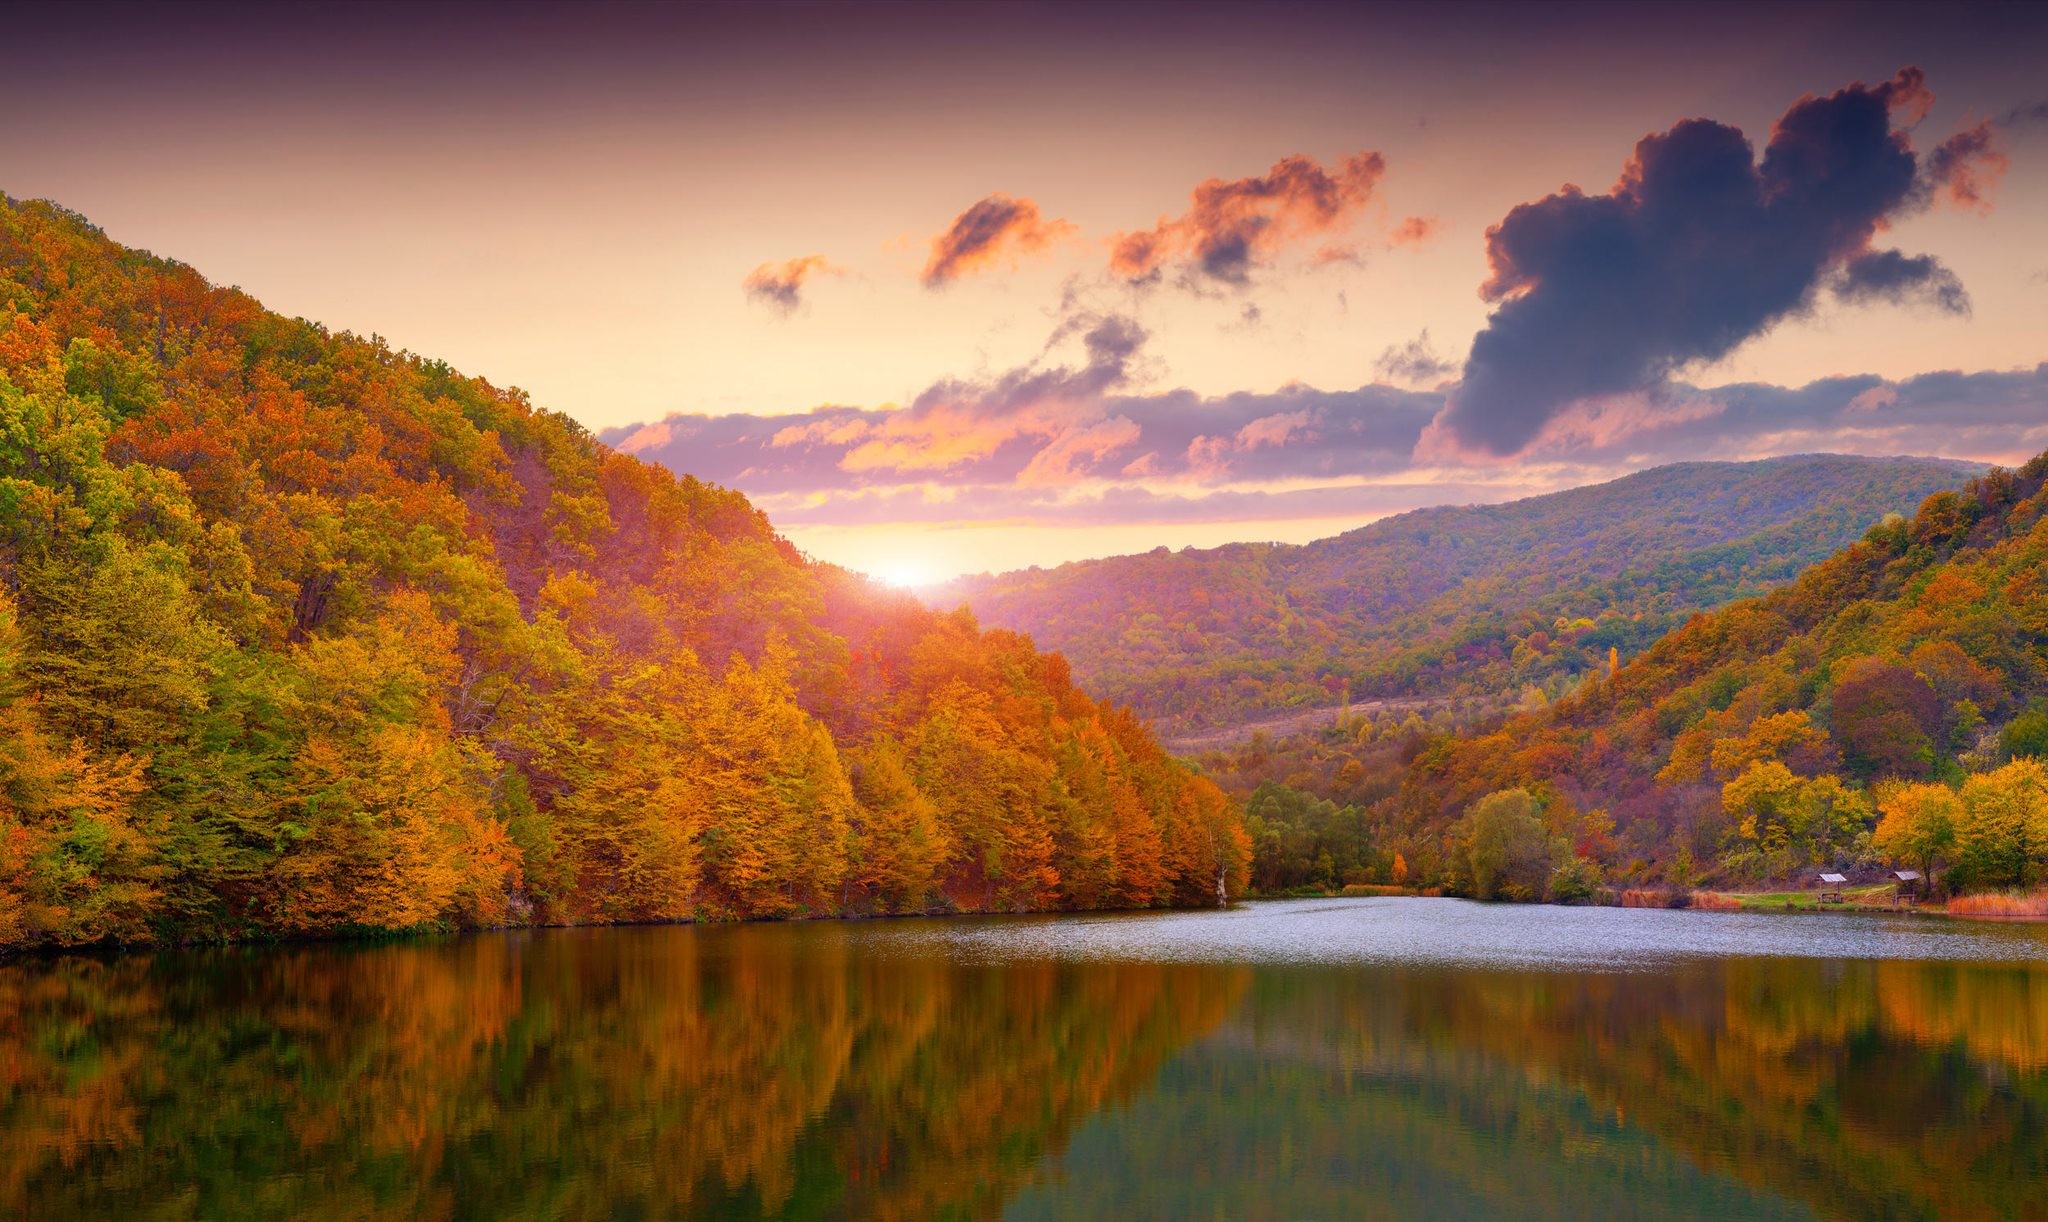 2048x1222 Going In Style Fall 2015 background image is a scenic Autumn landscape view  of a river at sunrise. The morning sun shines on the colorful, yellow, ...